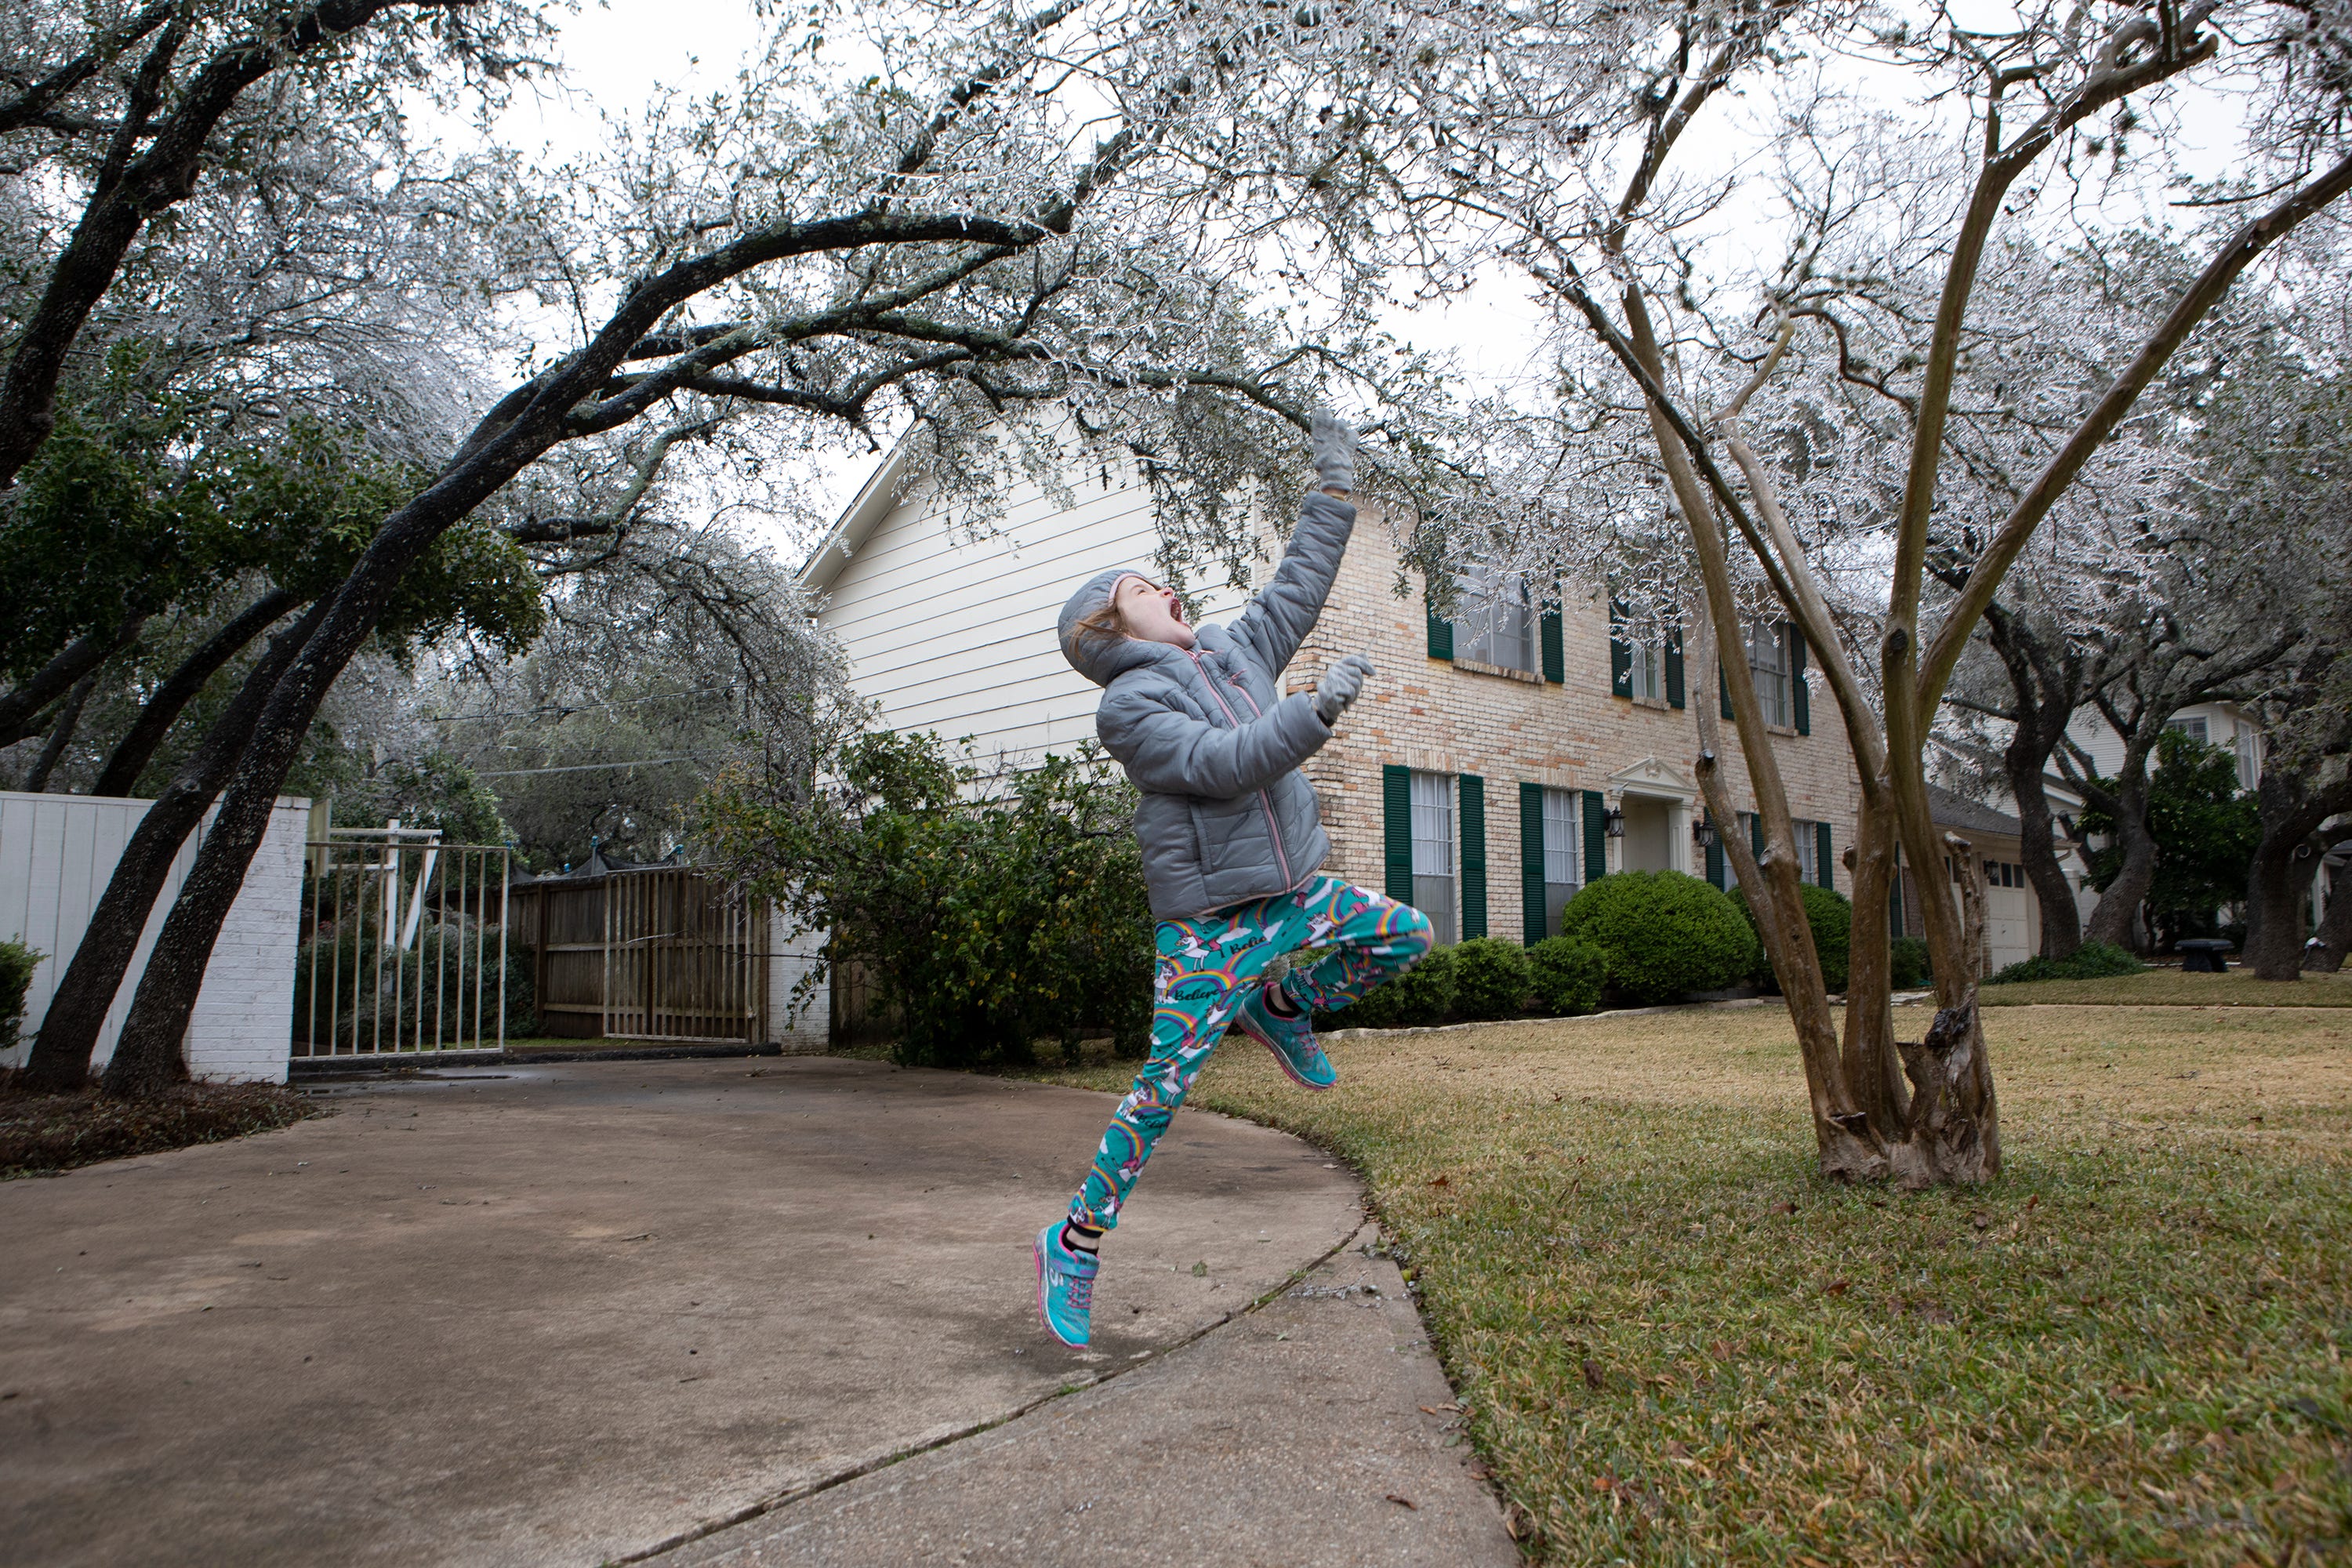 Micah Thomas, 8, jumps for an icicle on Feb. 12, 2021. Icy weather is expected through Sunday.